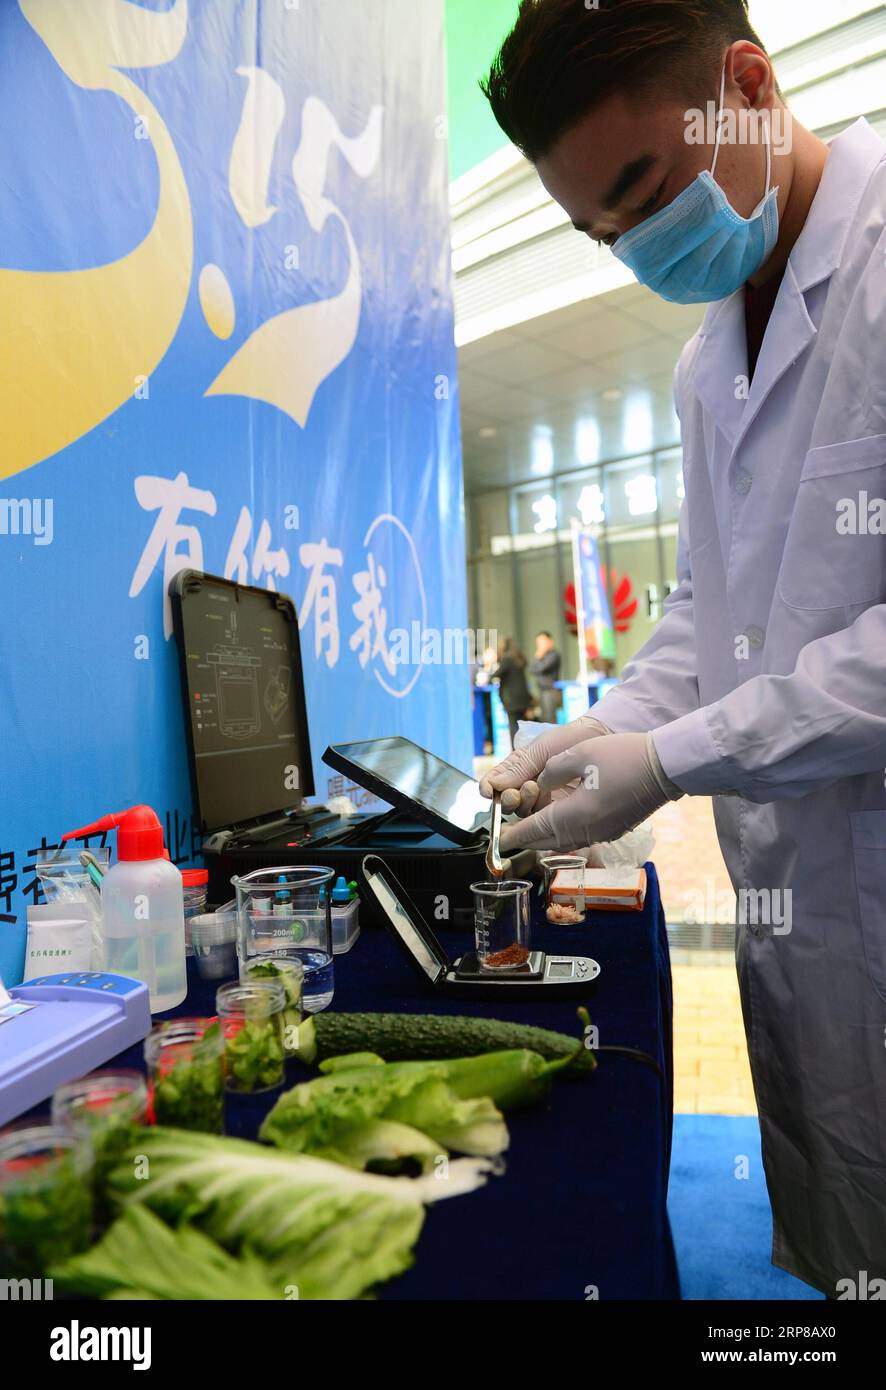 (190225) -- BEIJING, Feb. 25, 2019 (Xinhua) -- A technician checks the content of sulfur dioxide in food during an activity in Nanning, capital of south China s Guangxi Zhuang Autonomous Region, March 15, 2017, the International Consumer Rights Day. China has unveiled a guideline to enhance the accountability system of local governments to strengthen supervision over food safety. Food safety will be included in the performance assessment of the Party and government leading officials, according to the guideline released by the Central Committee of the Communist Party of China (CPC) and the Stat Stock Photo